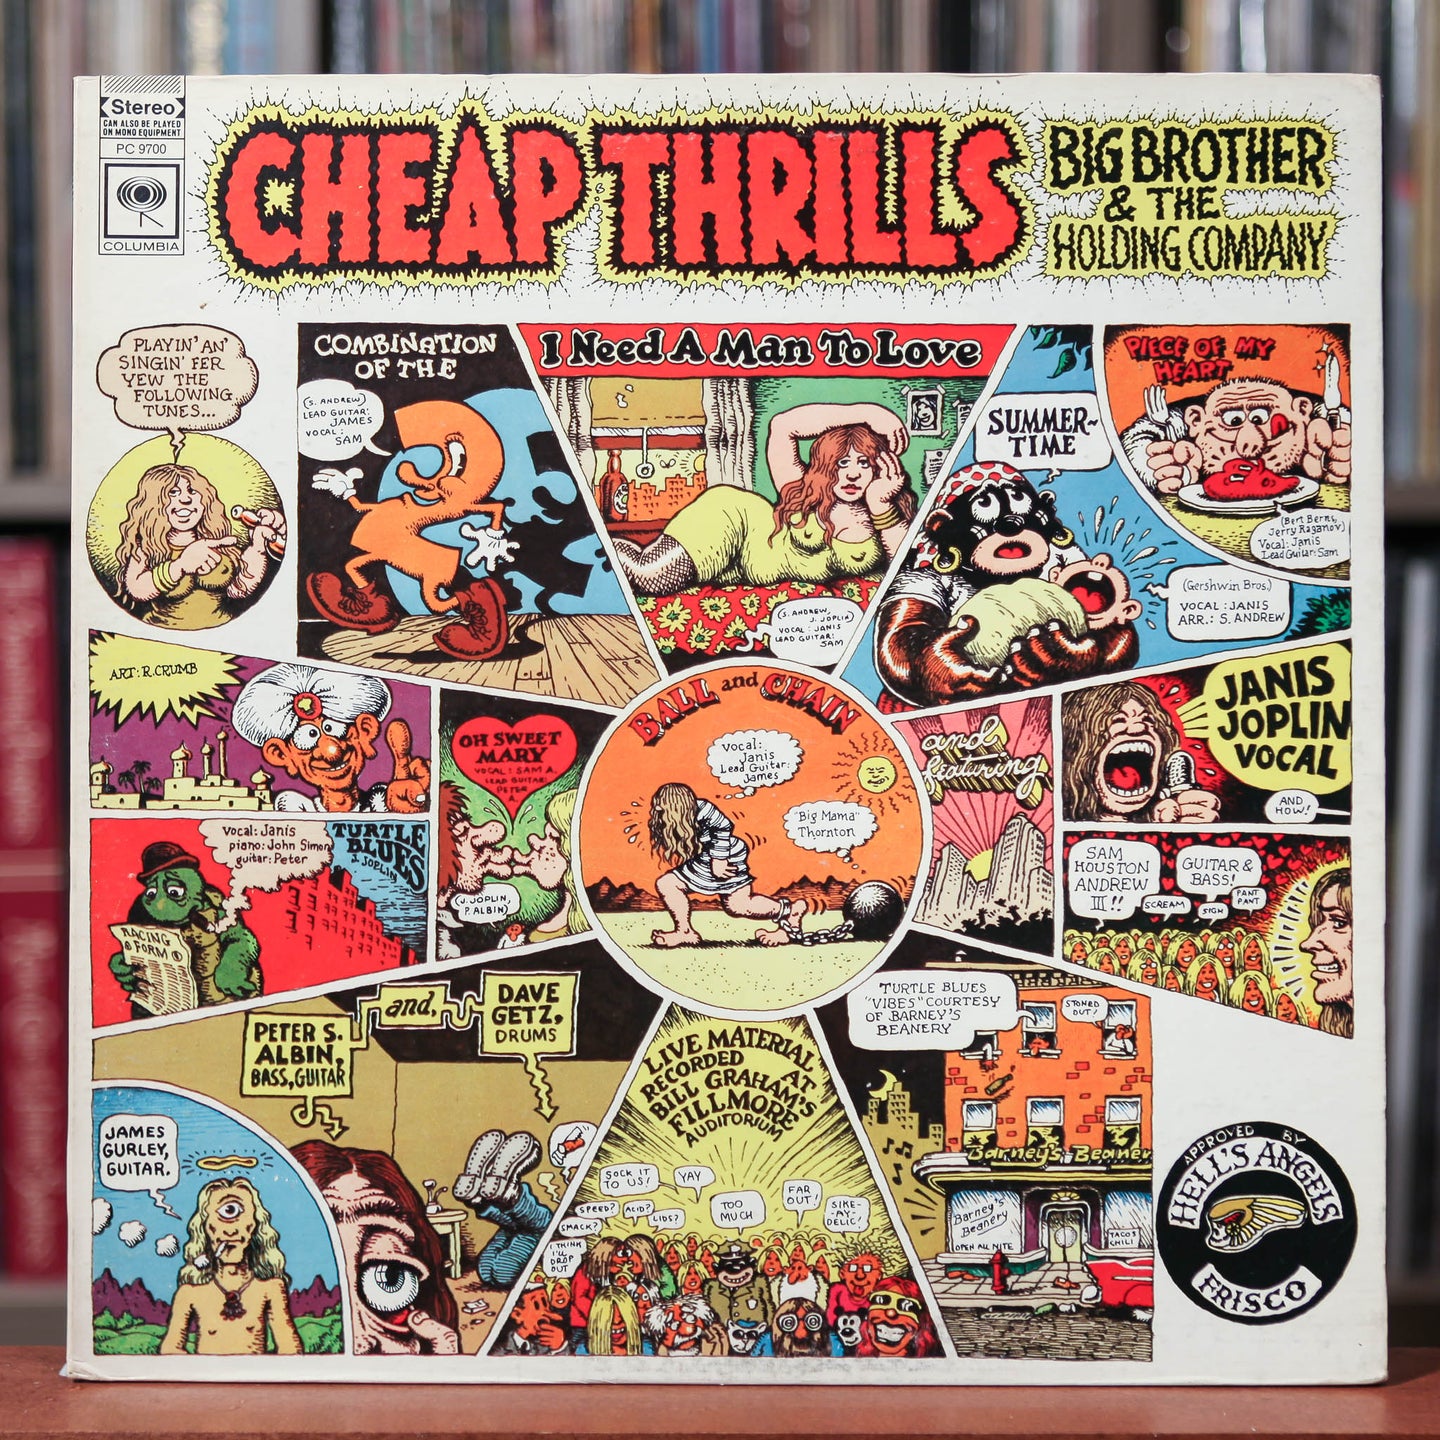 Big Brother and the Holding Company - Cheap Thrills - 1980 Columbia, EX/VG